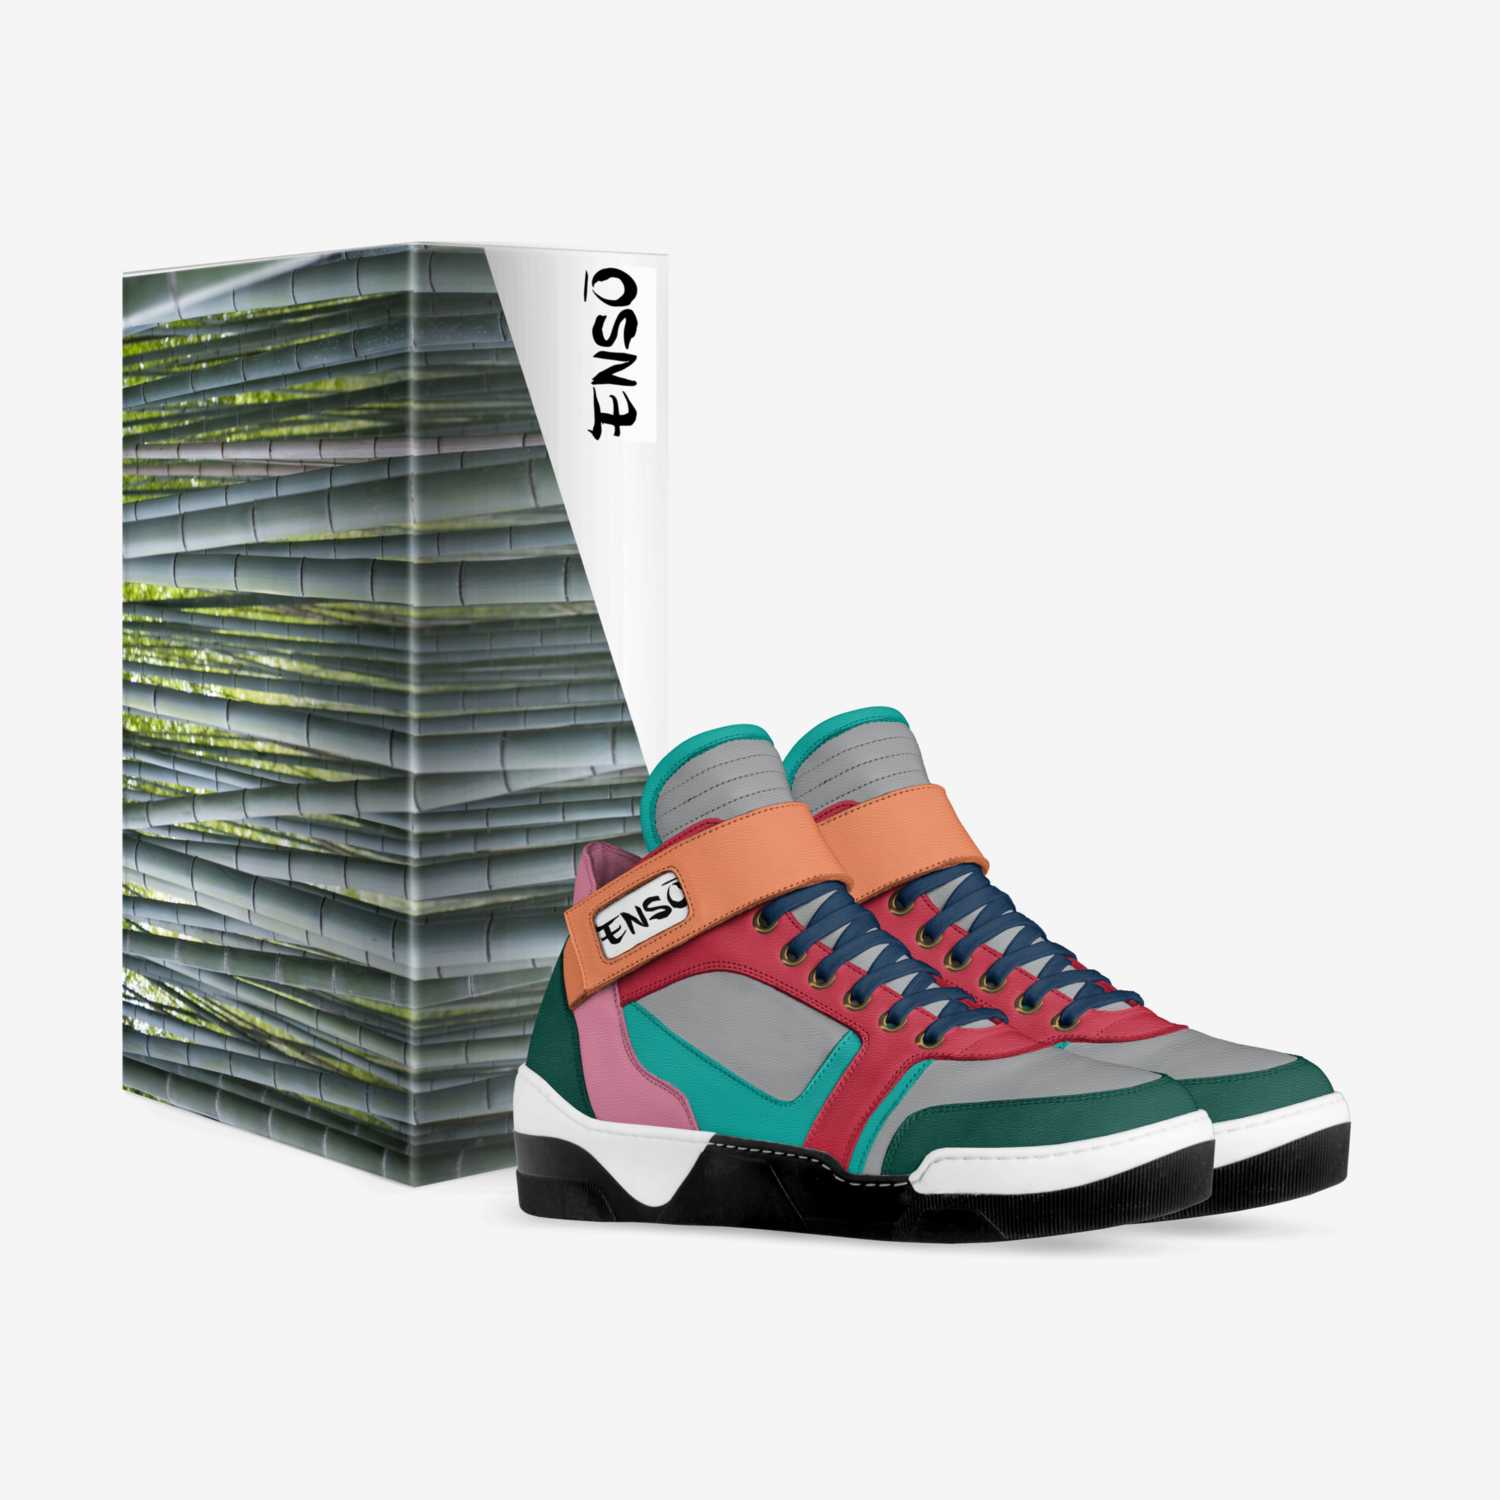 Enso XUS custom made in Italy shoes by Enso Llc | Box view